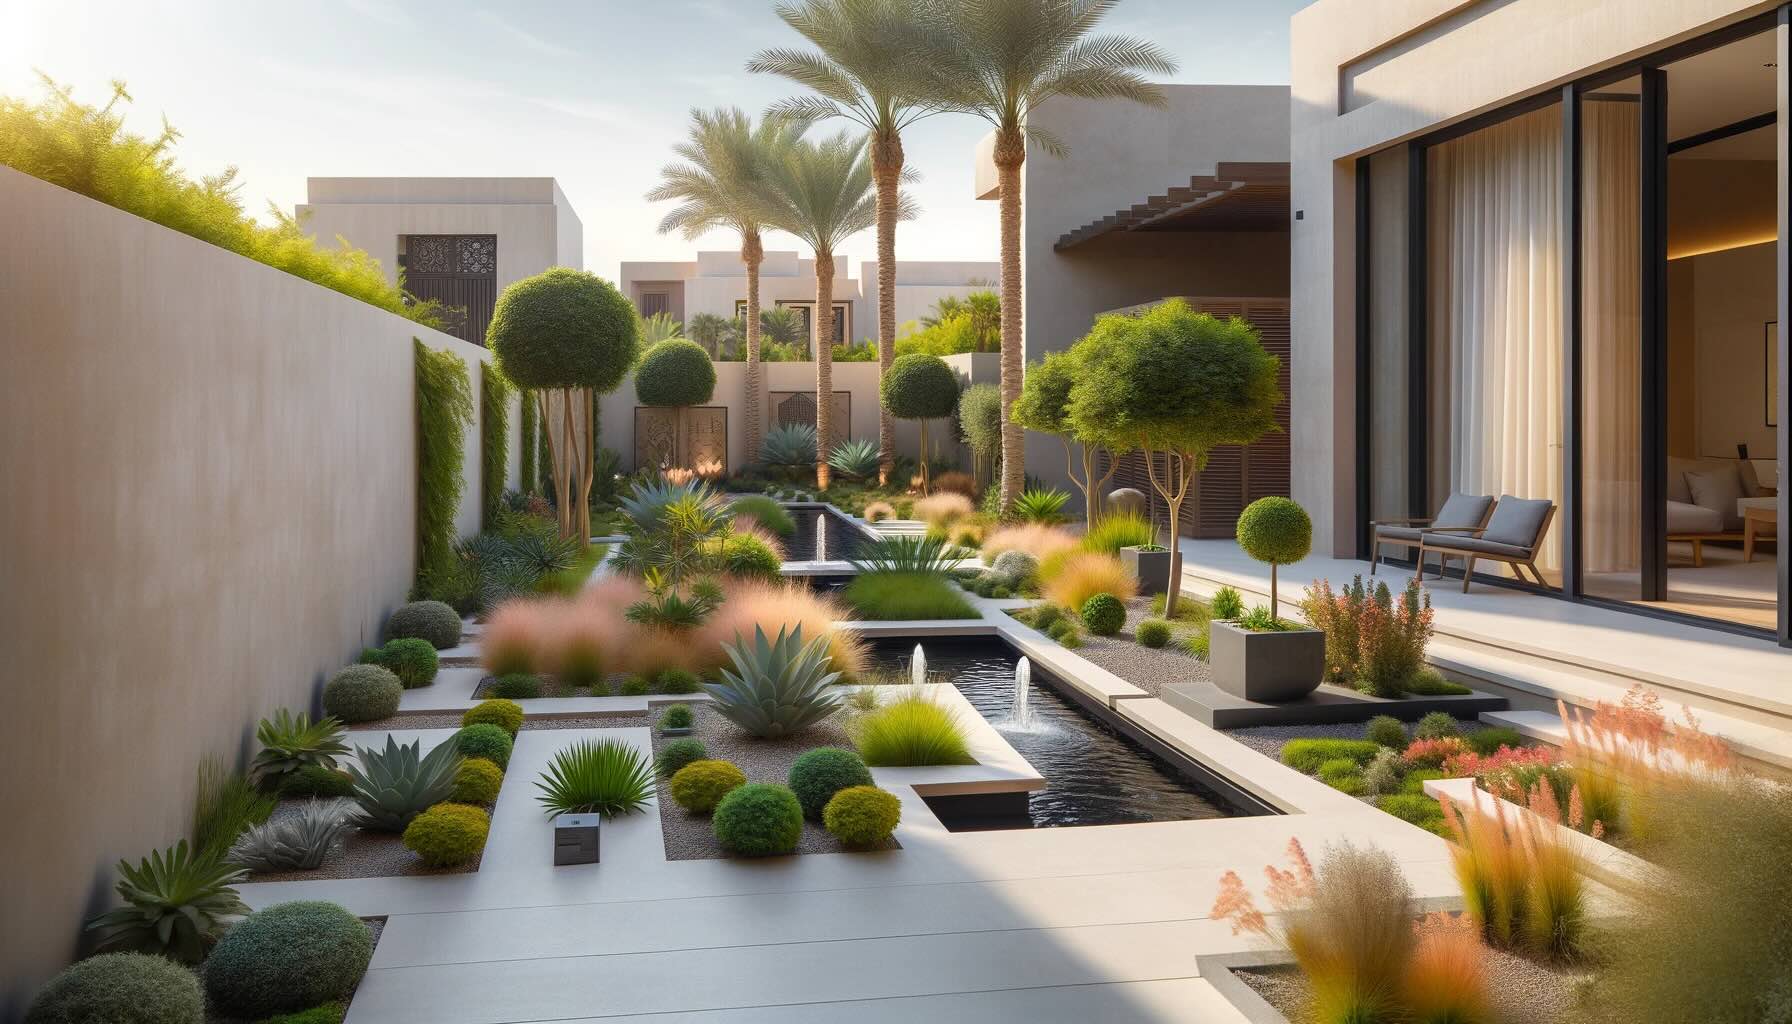 Modern landscaped garden in Egypt with minimalist design and native plants.